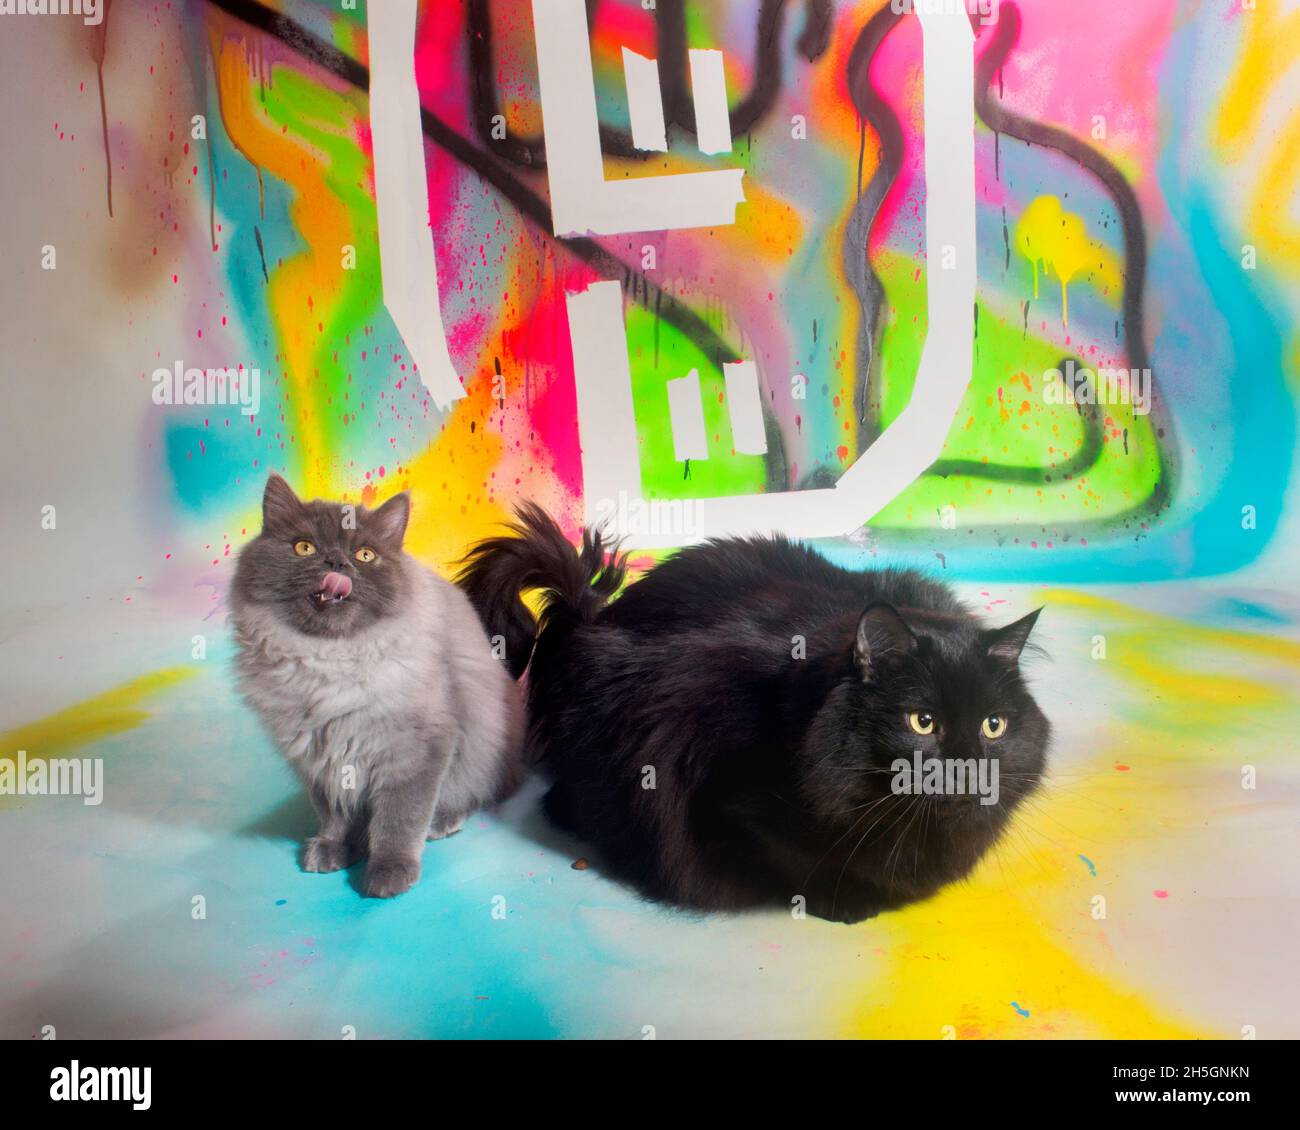 Two sweet fluffy long haired cats sitting together on a colorful painted backdrop. Stock Photo